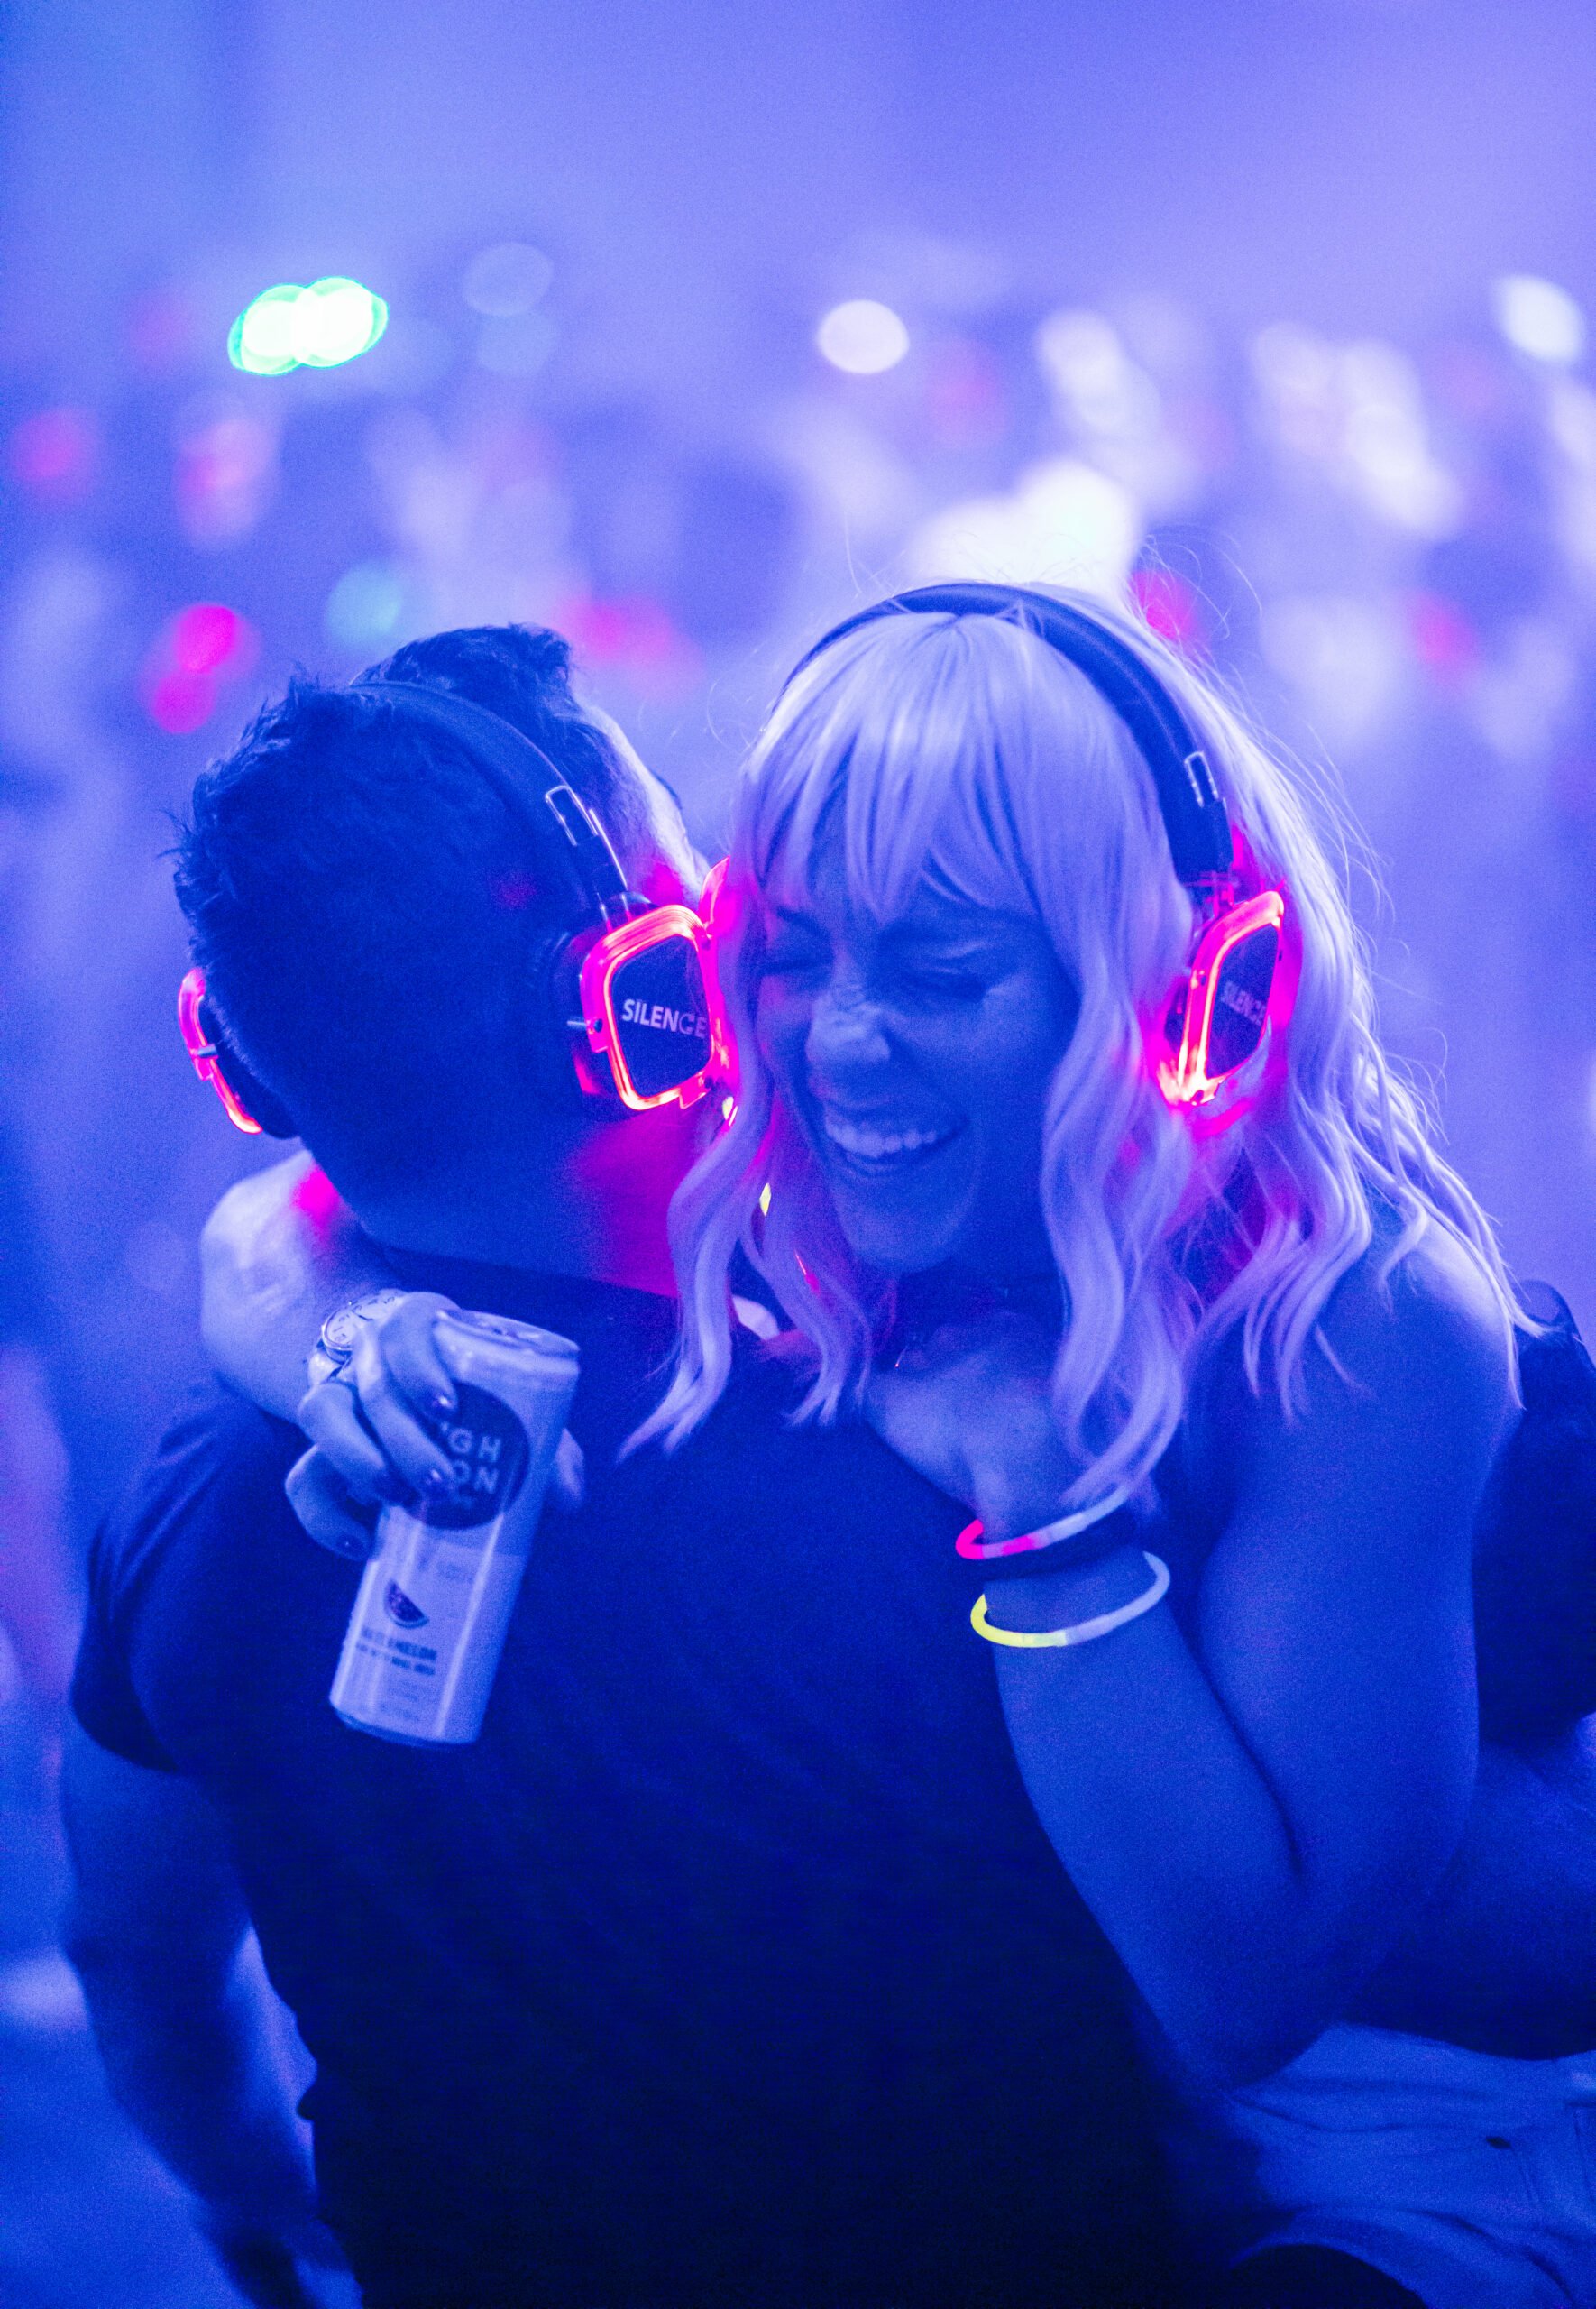 Man and woman dancing, wearing headphones. Woman is holding a drink and laughing.